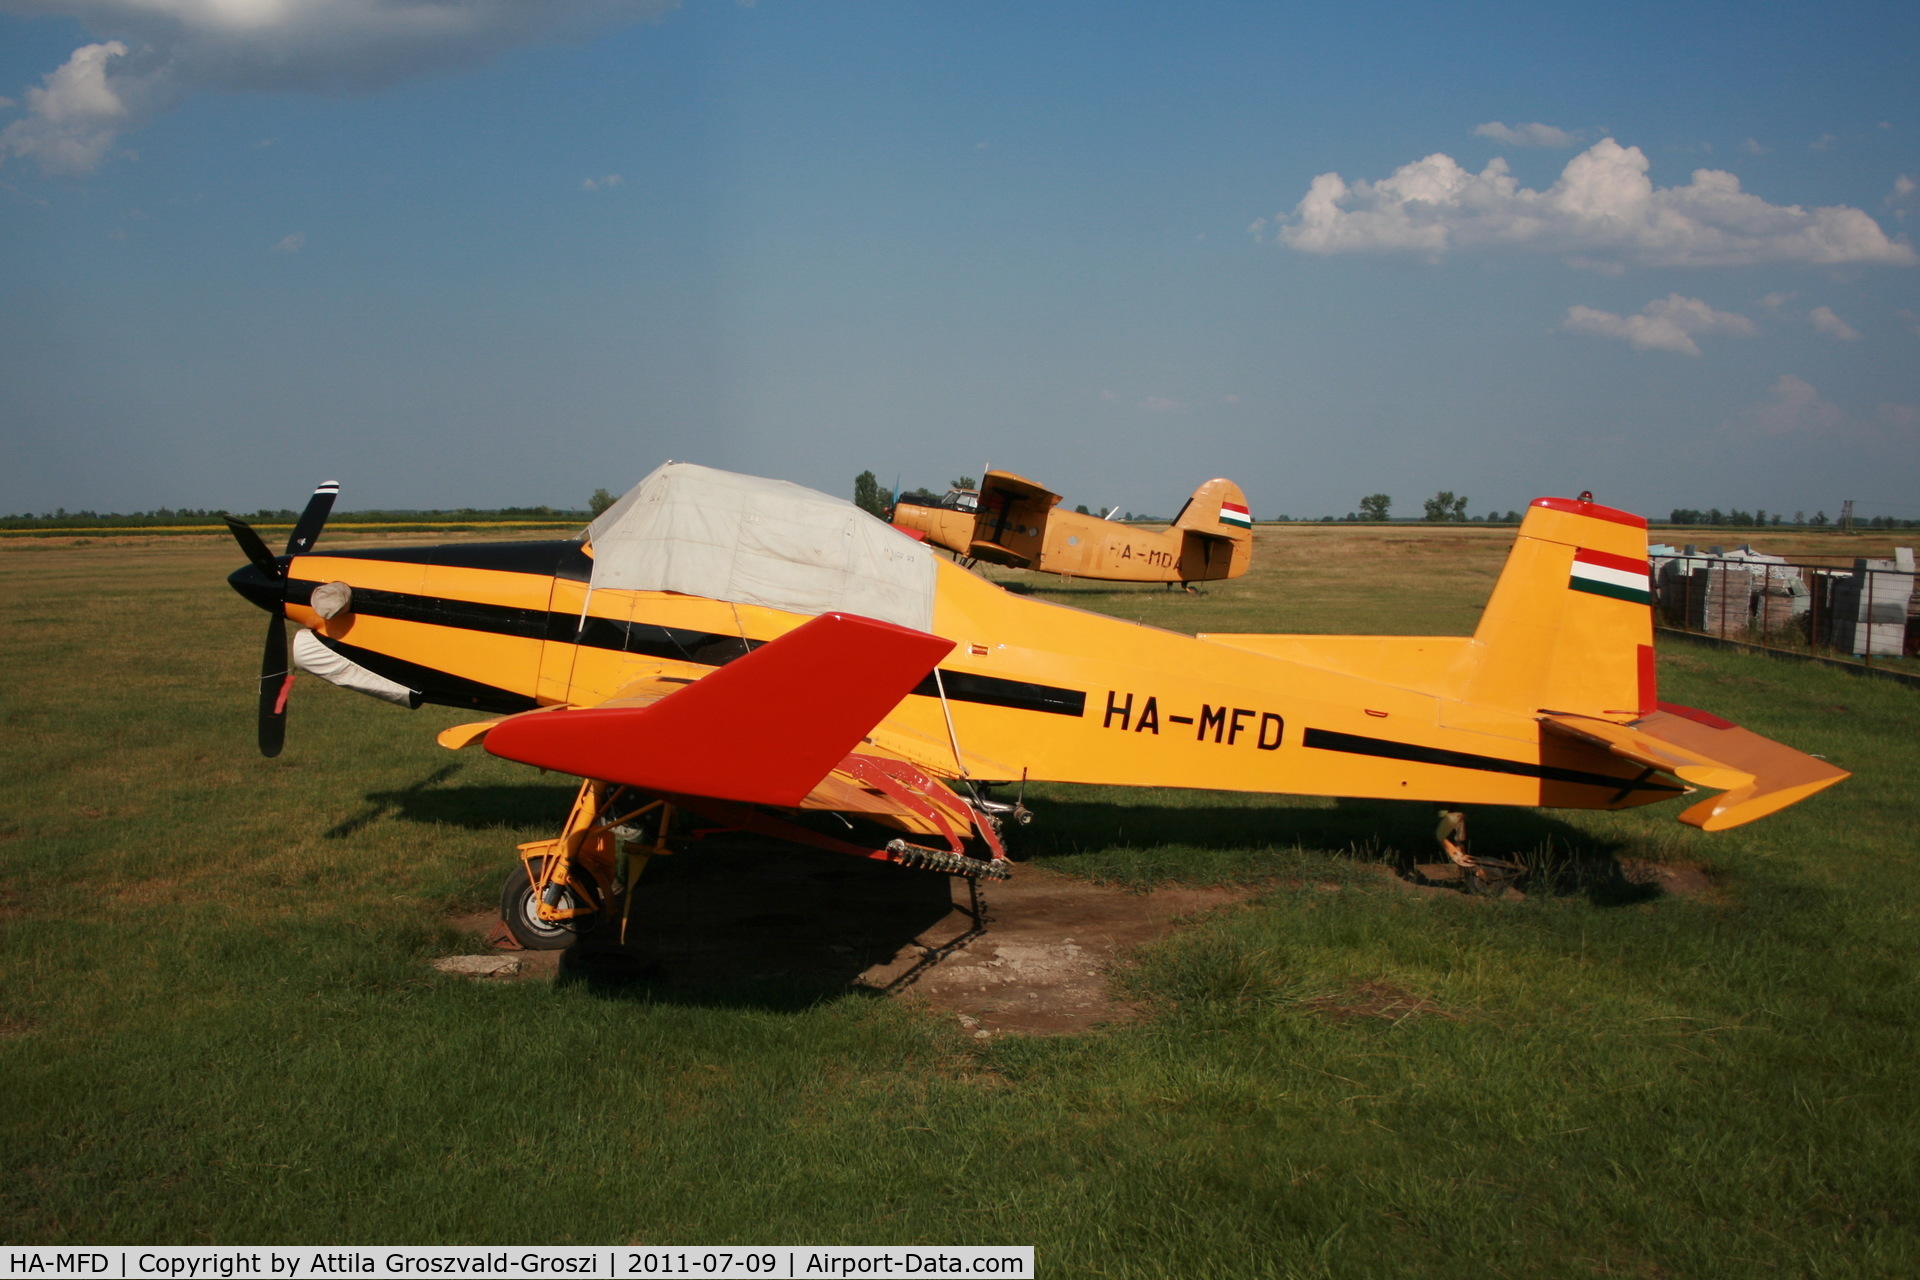 HA-MFD, 1989 Let Z-137T Agro-Turbo C/N 034, Jászapáti agricultural airport - Hungary. With the new painting